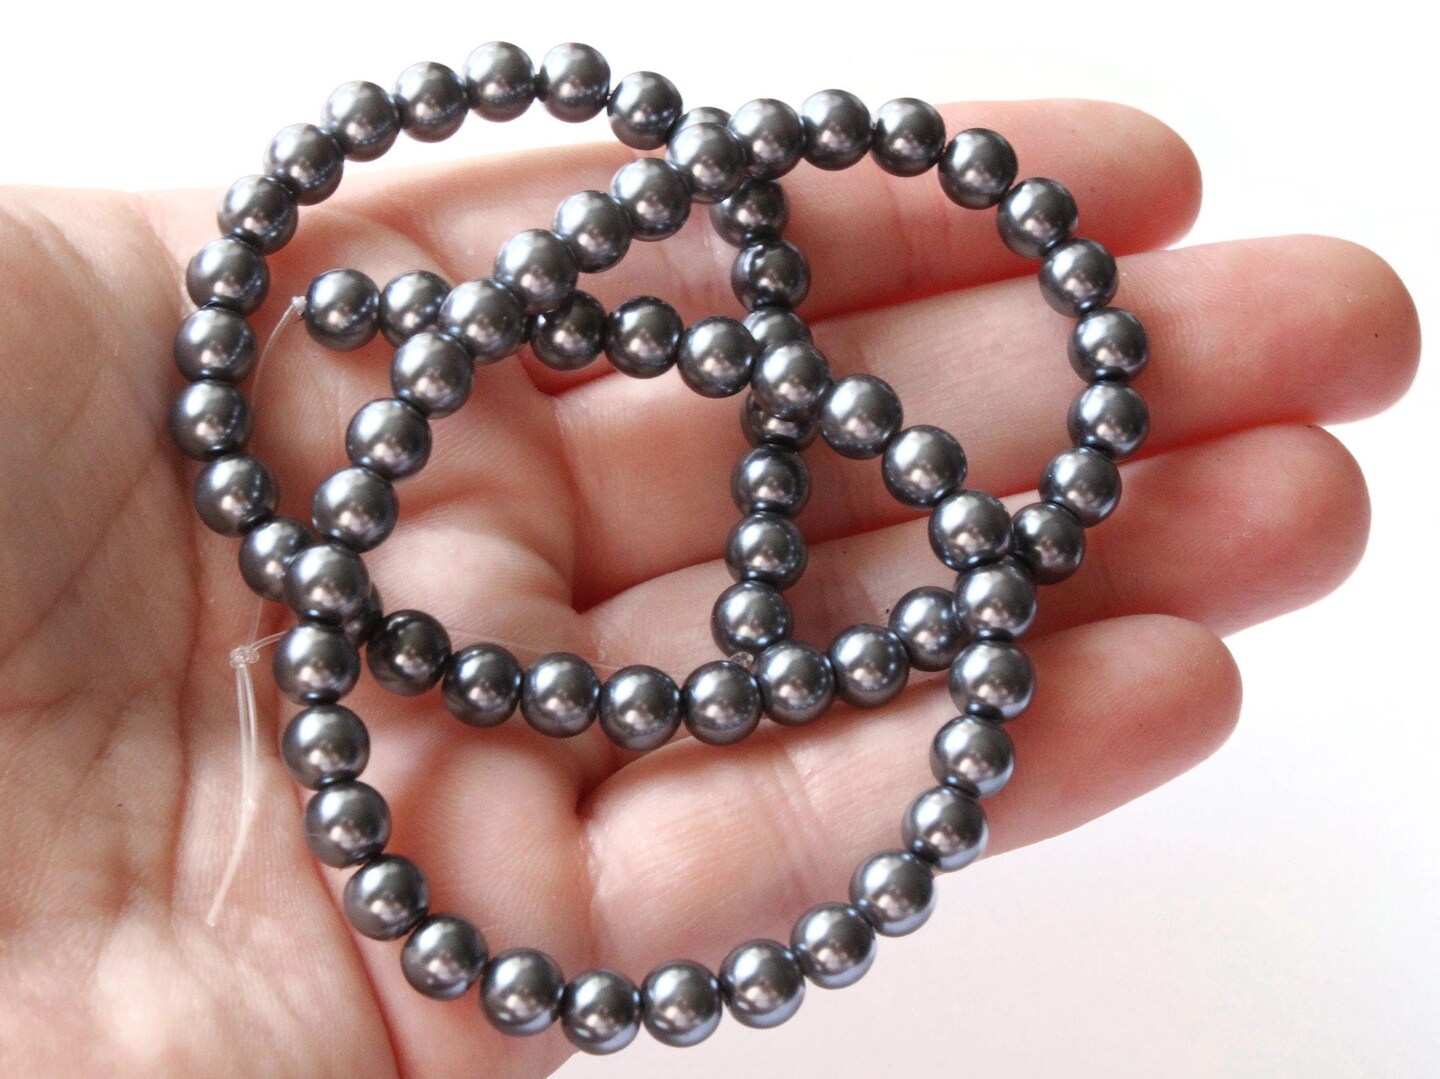 72 6mm Gray Glass Faux Pearls Round Beads